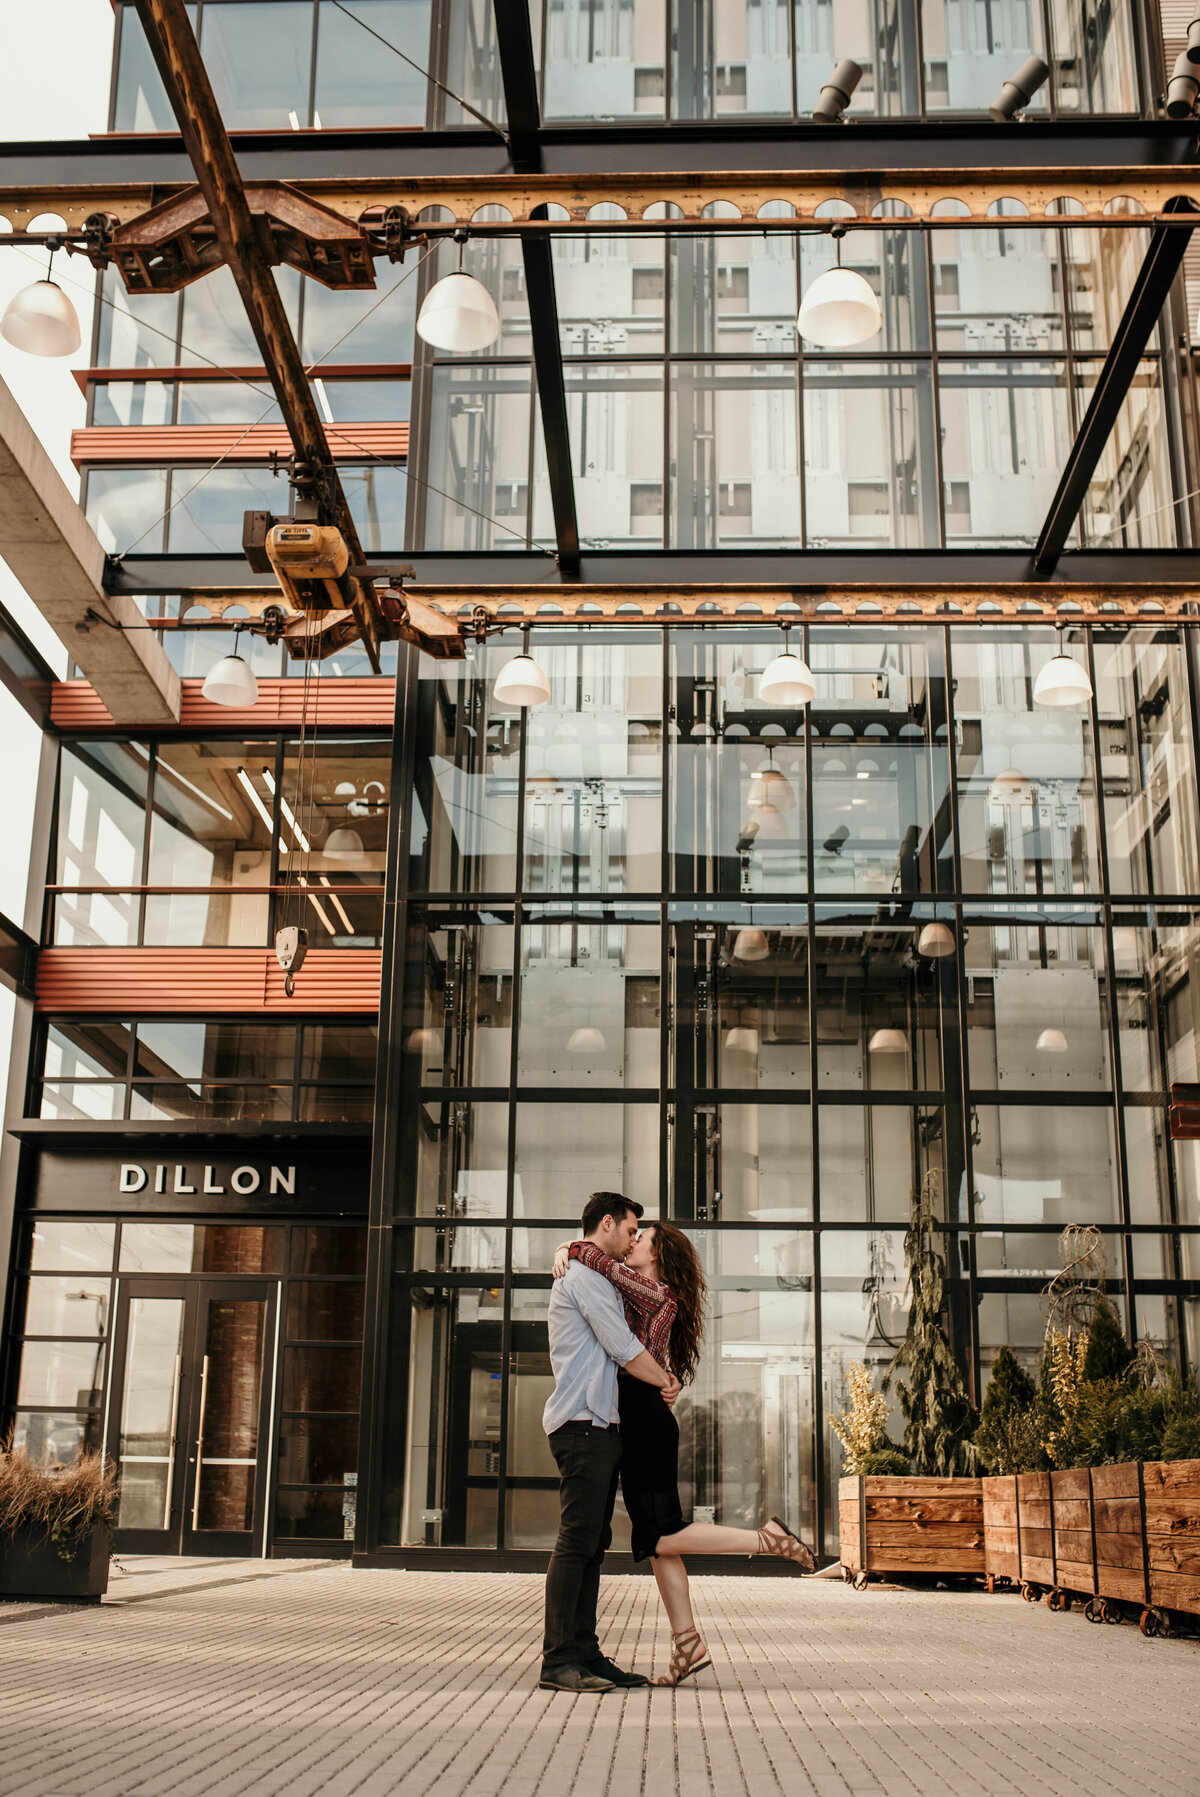 A couple kisses in front of a building